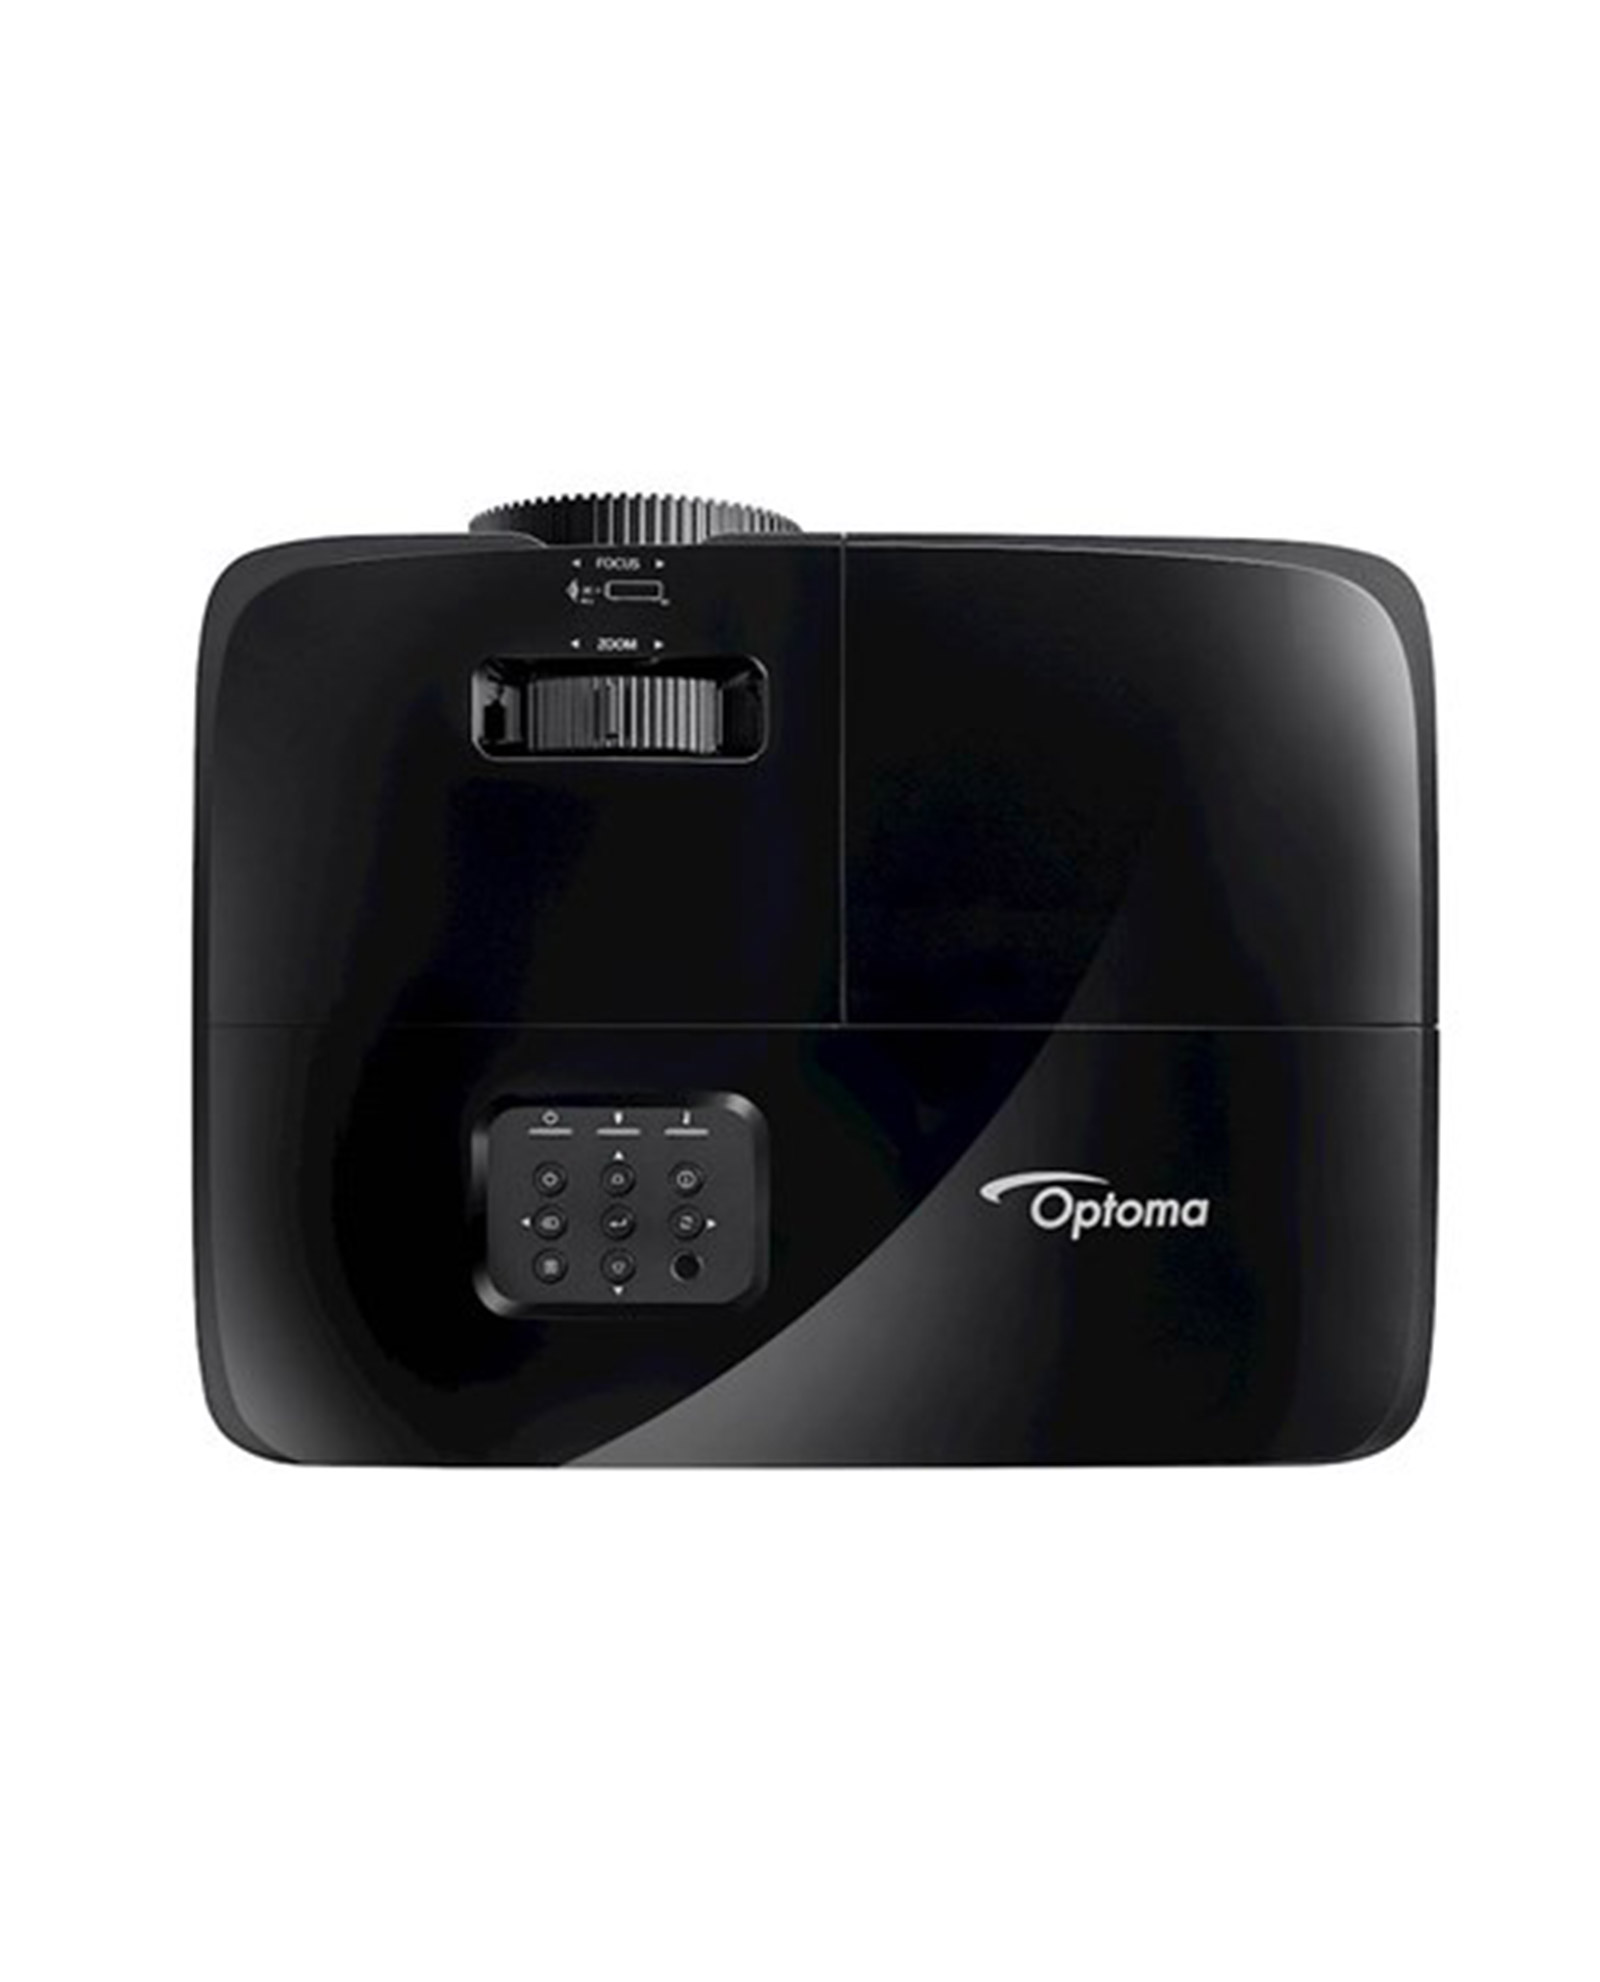 Optoma Hd28e 3800lm 1080p 30000 1 Home Entertainment Projector 4